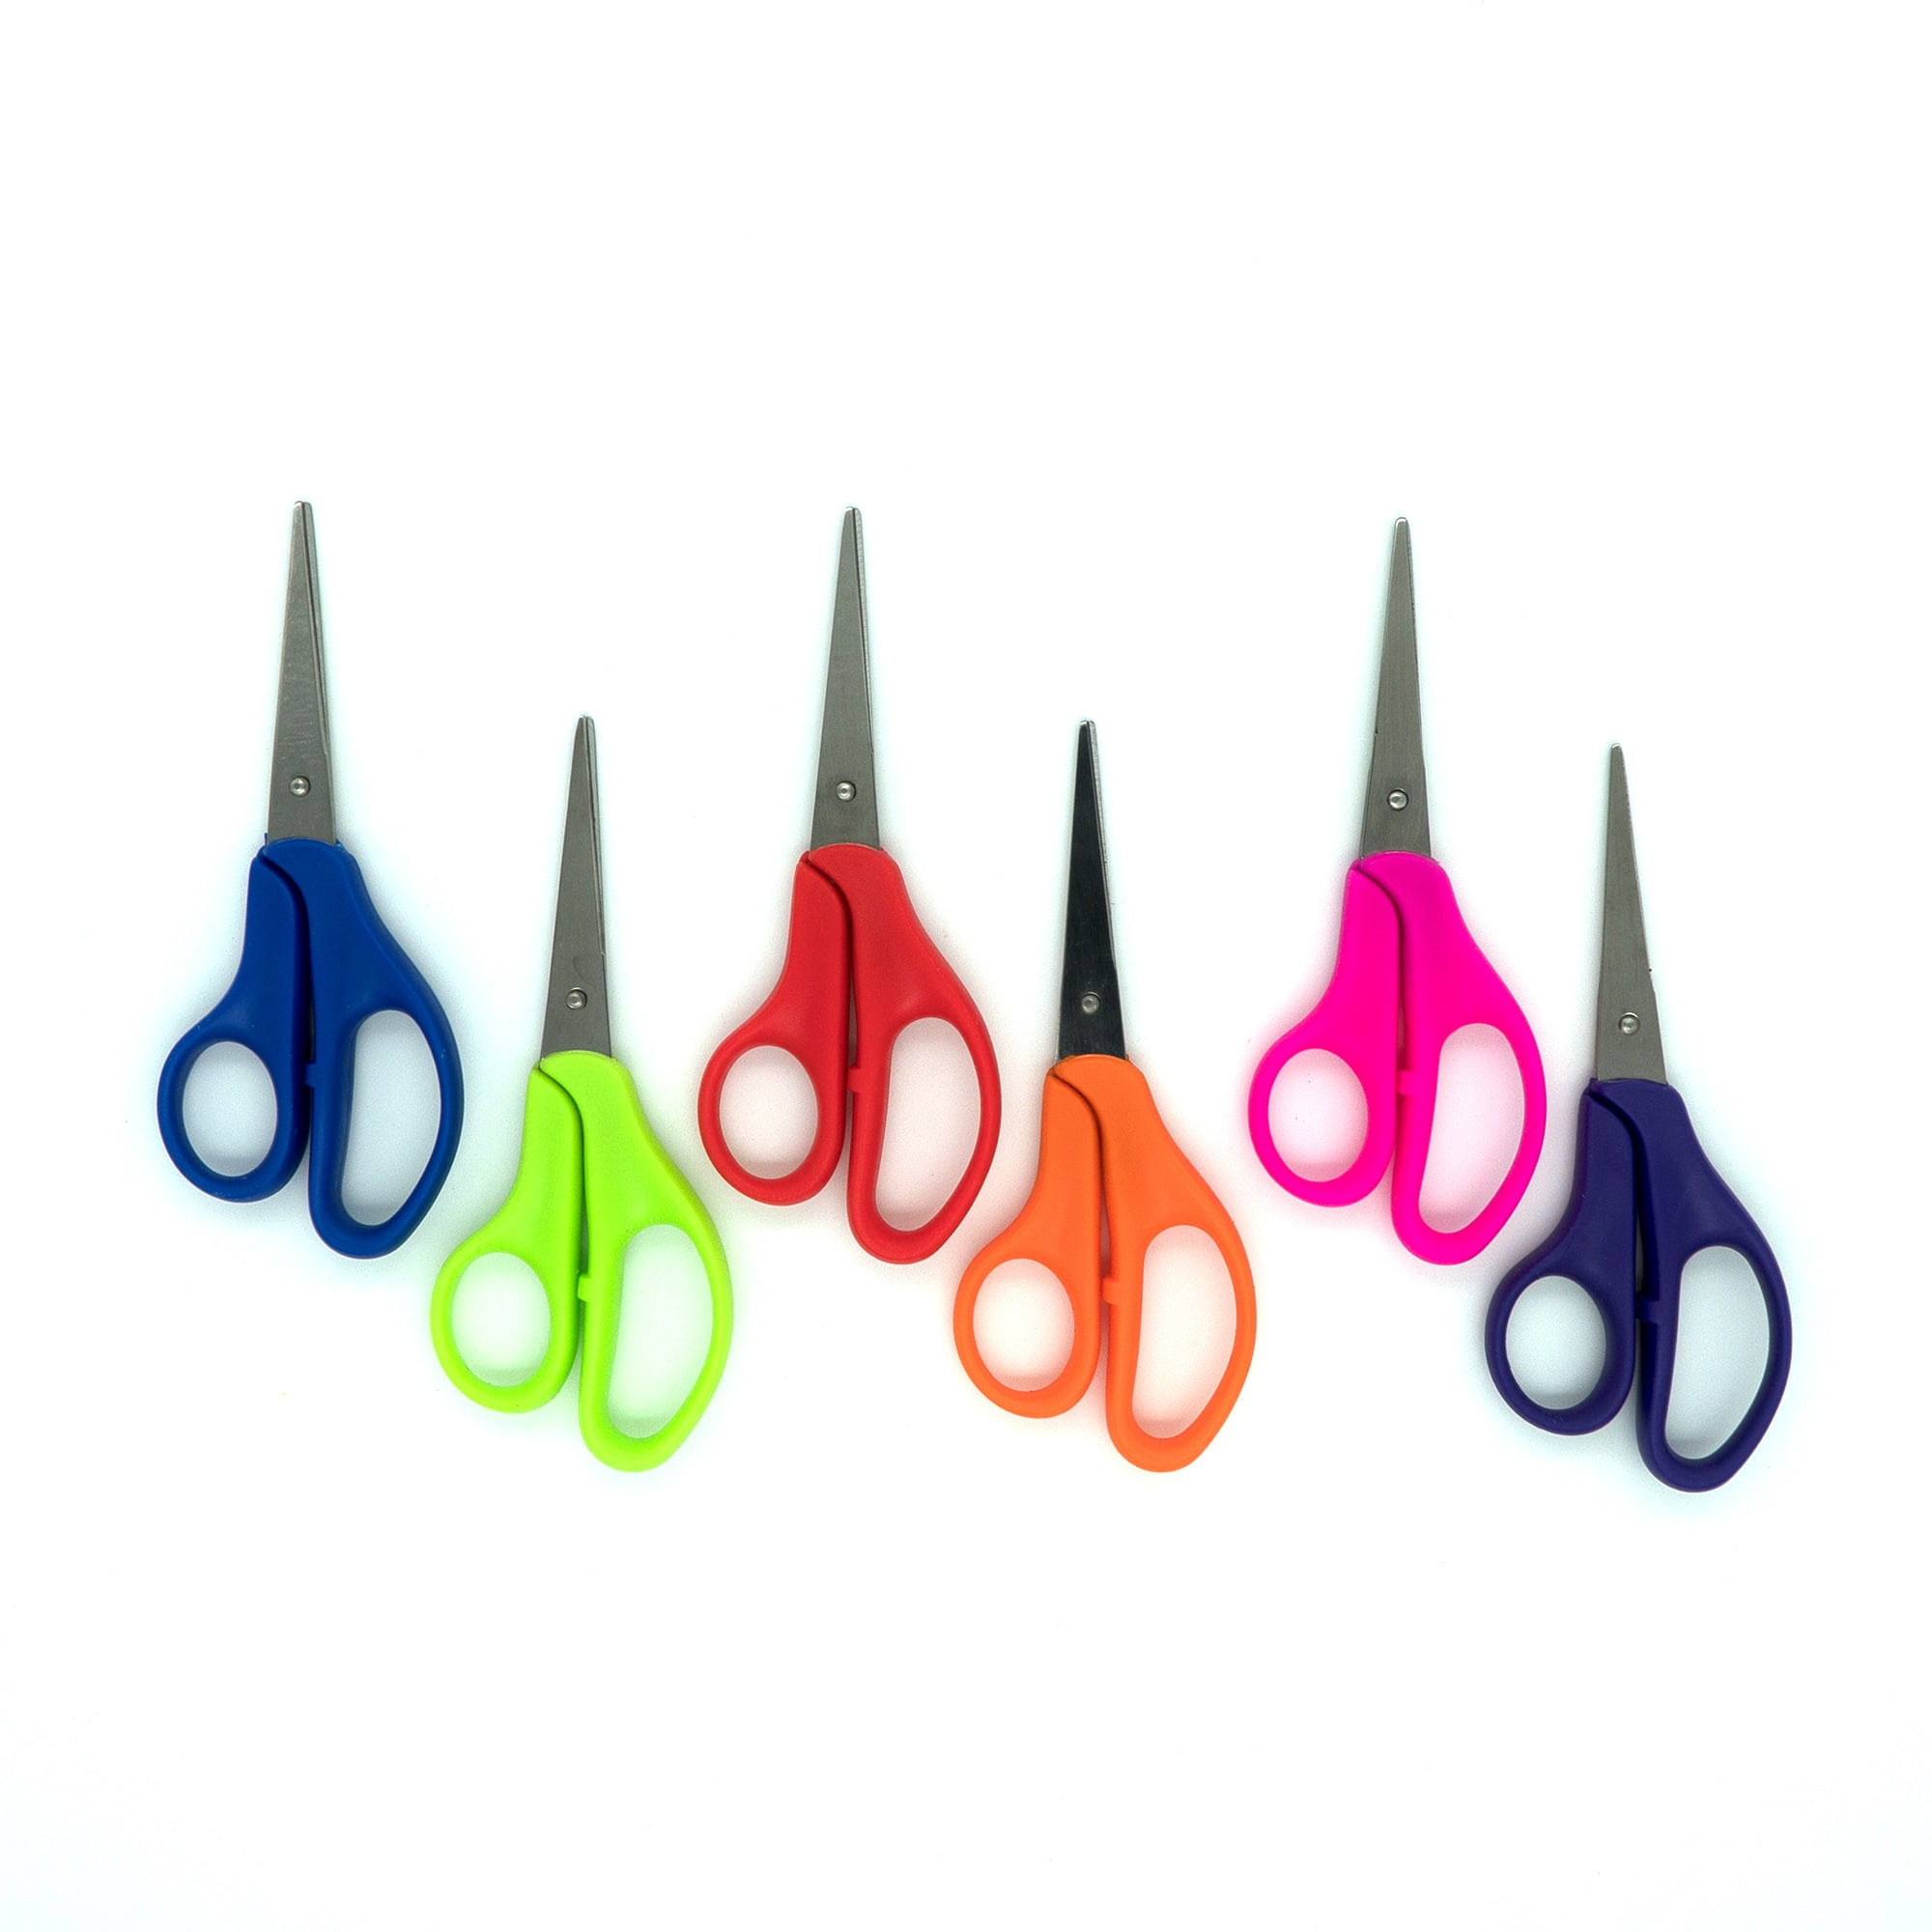 Emraw 5 Pointed Tip School Scissors Soft Comfort Grip Handles Small Sharp  Scissors Sharp Blades for Cutting Paper and Fabric Kitchen Shear (Pack of  6) 